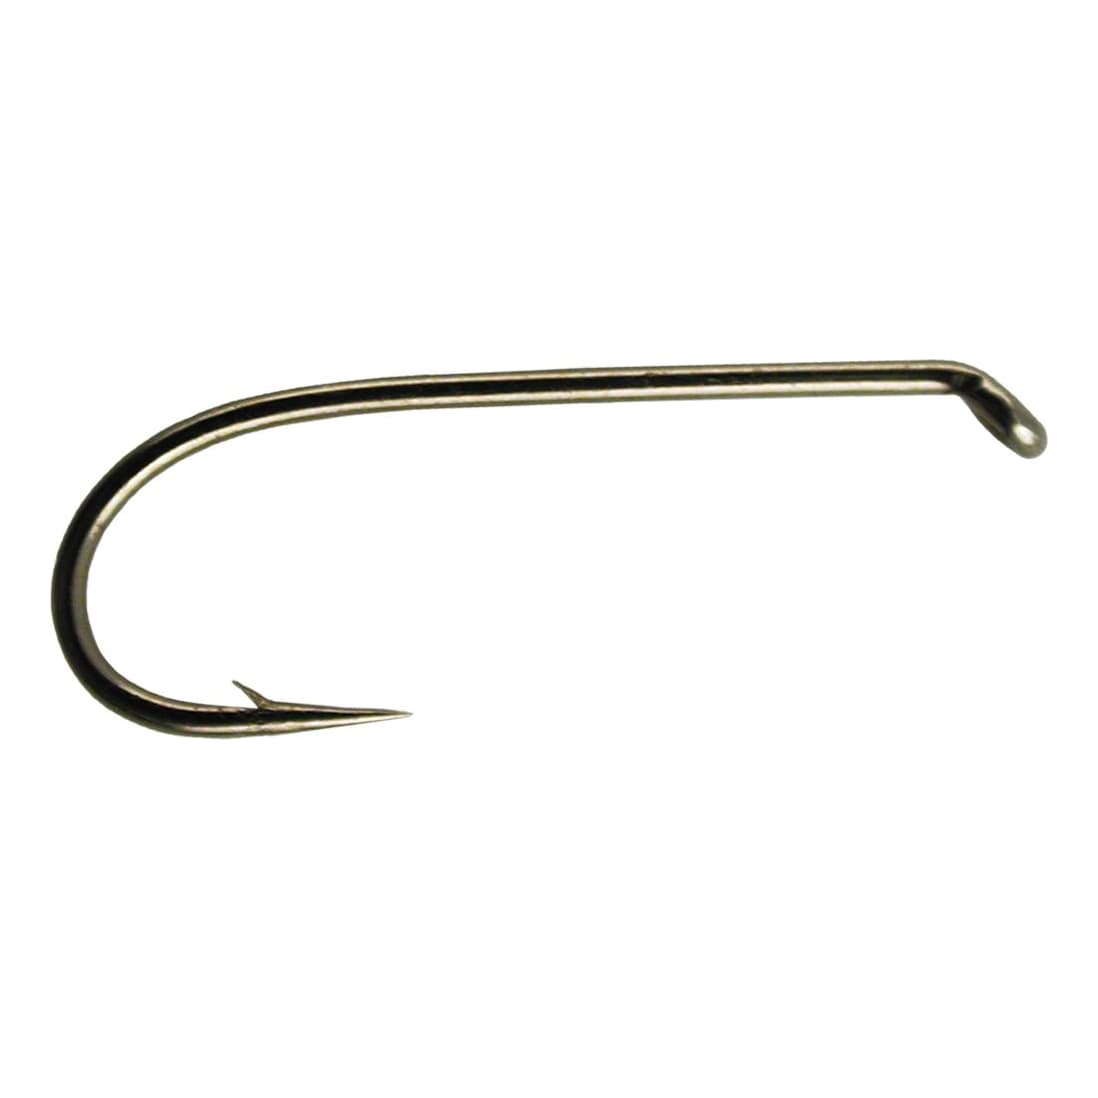 White River Fly Shop® Nymph Hook